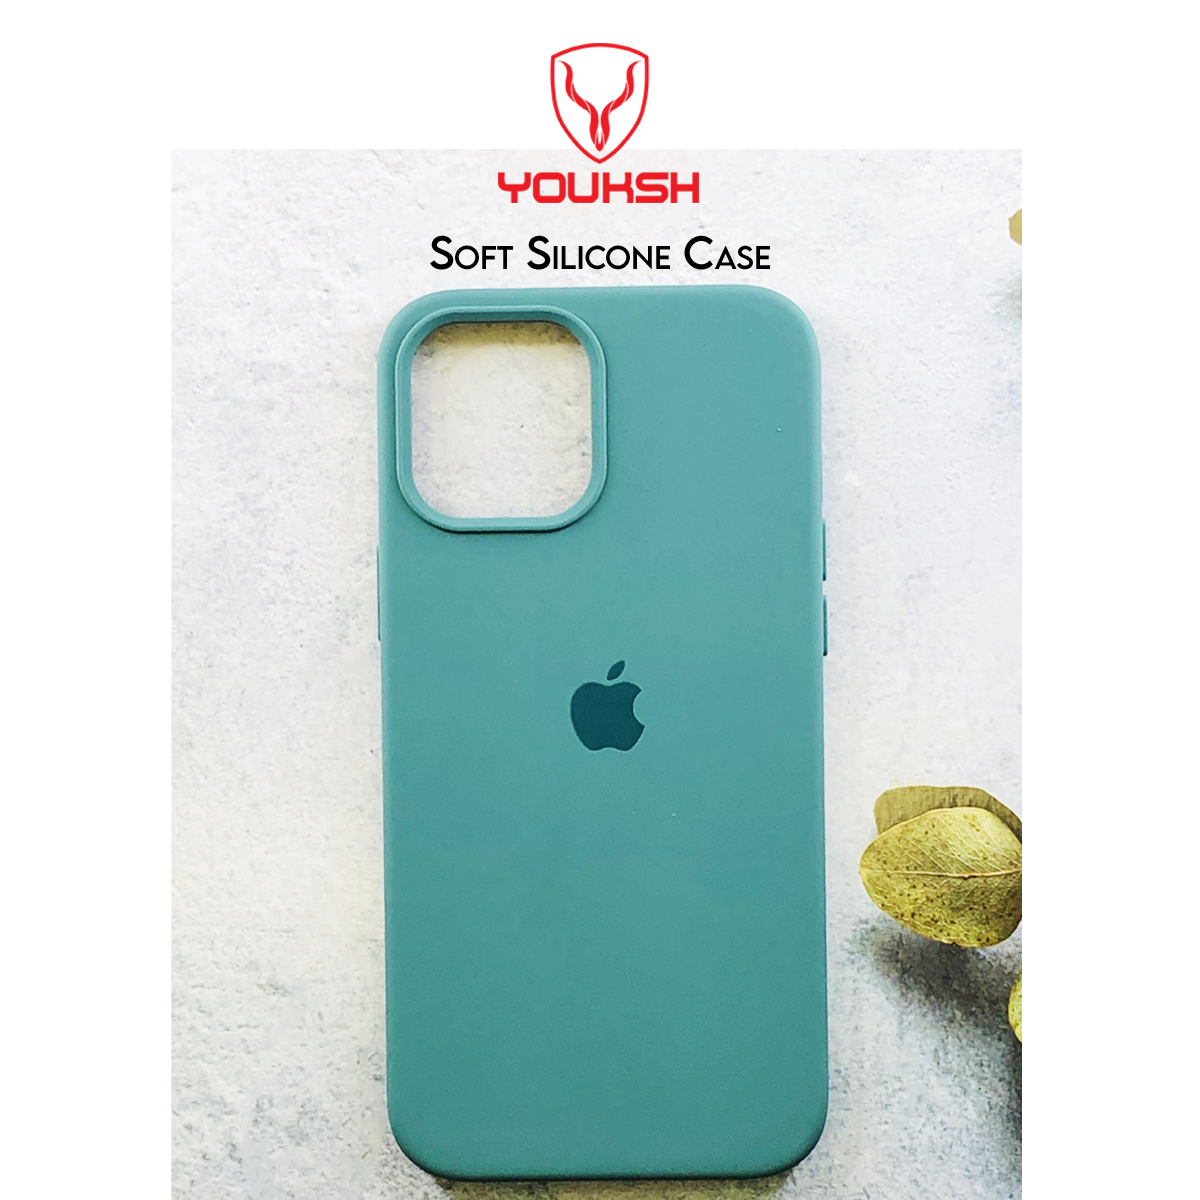 Apple iPhone 12 - Youksh Premium Ultra Slim Shockproof Liquid Silky Silicone Soft Rubber Comfortable Protective Case.